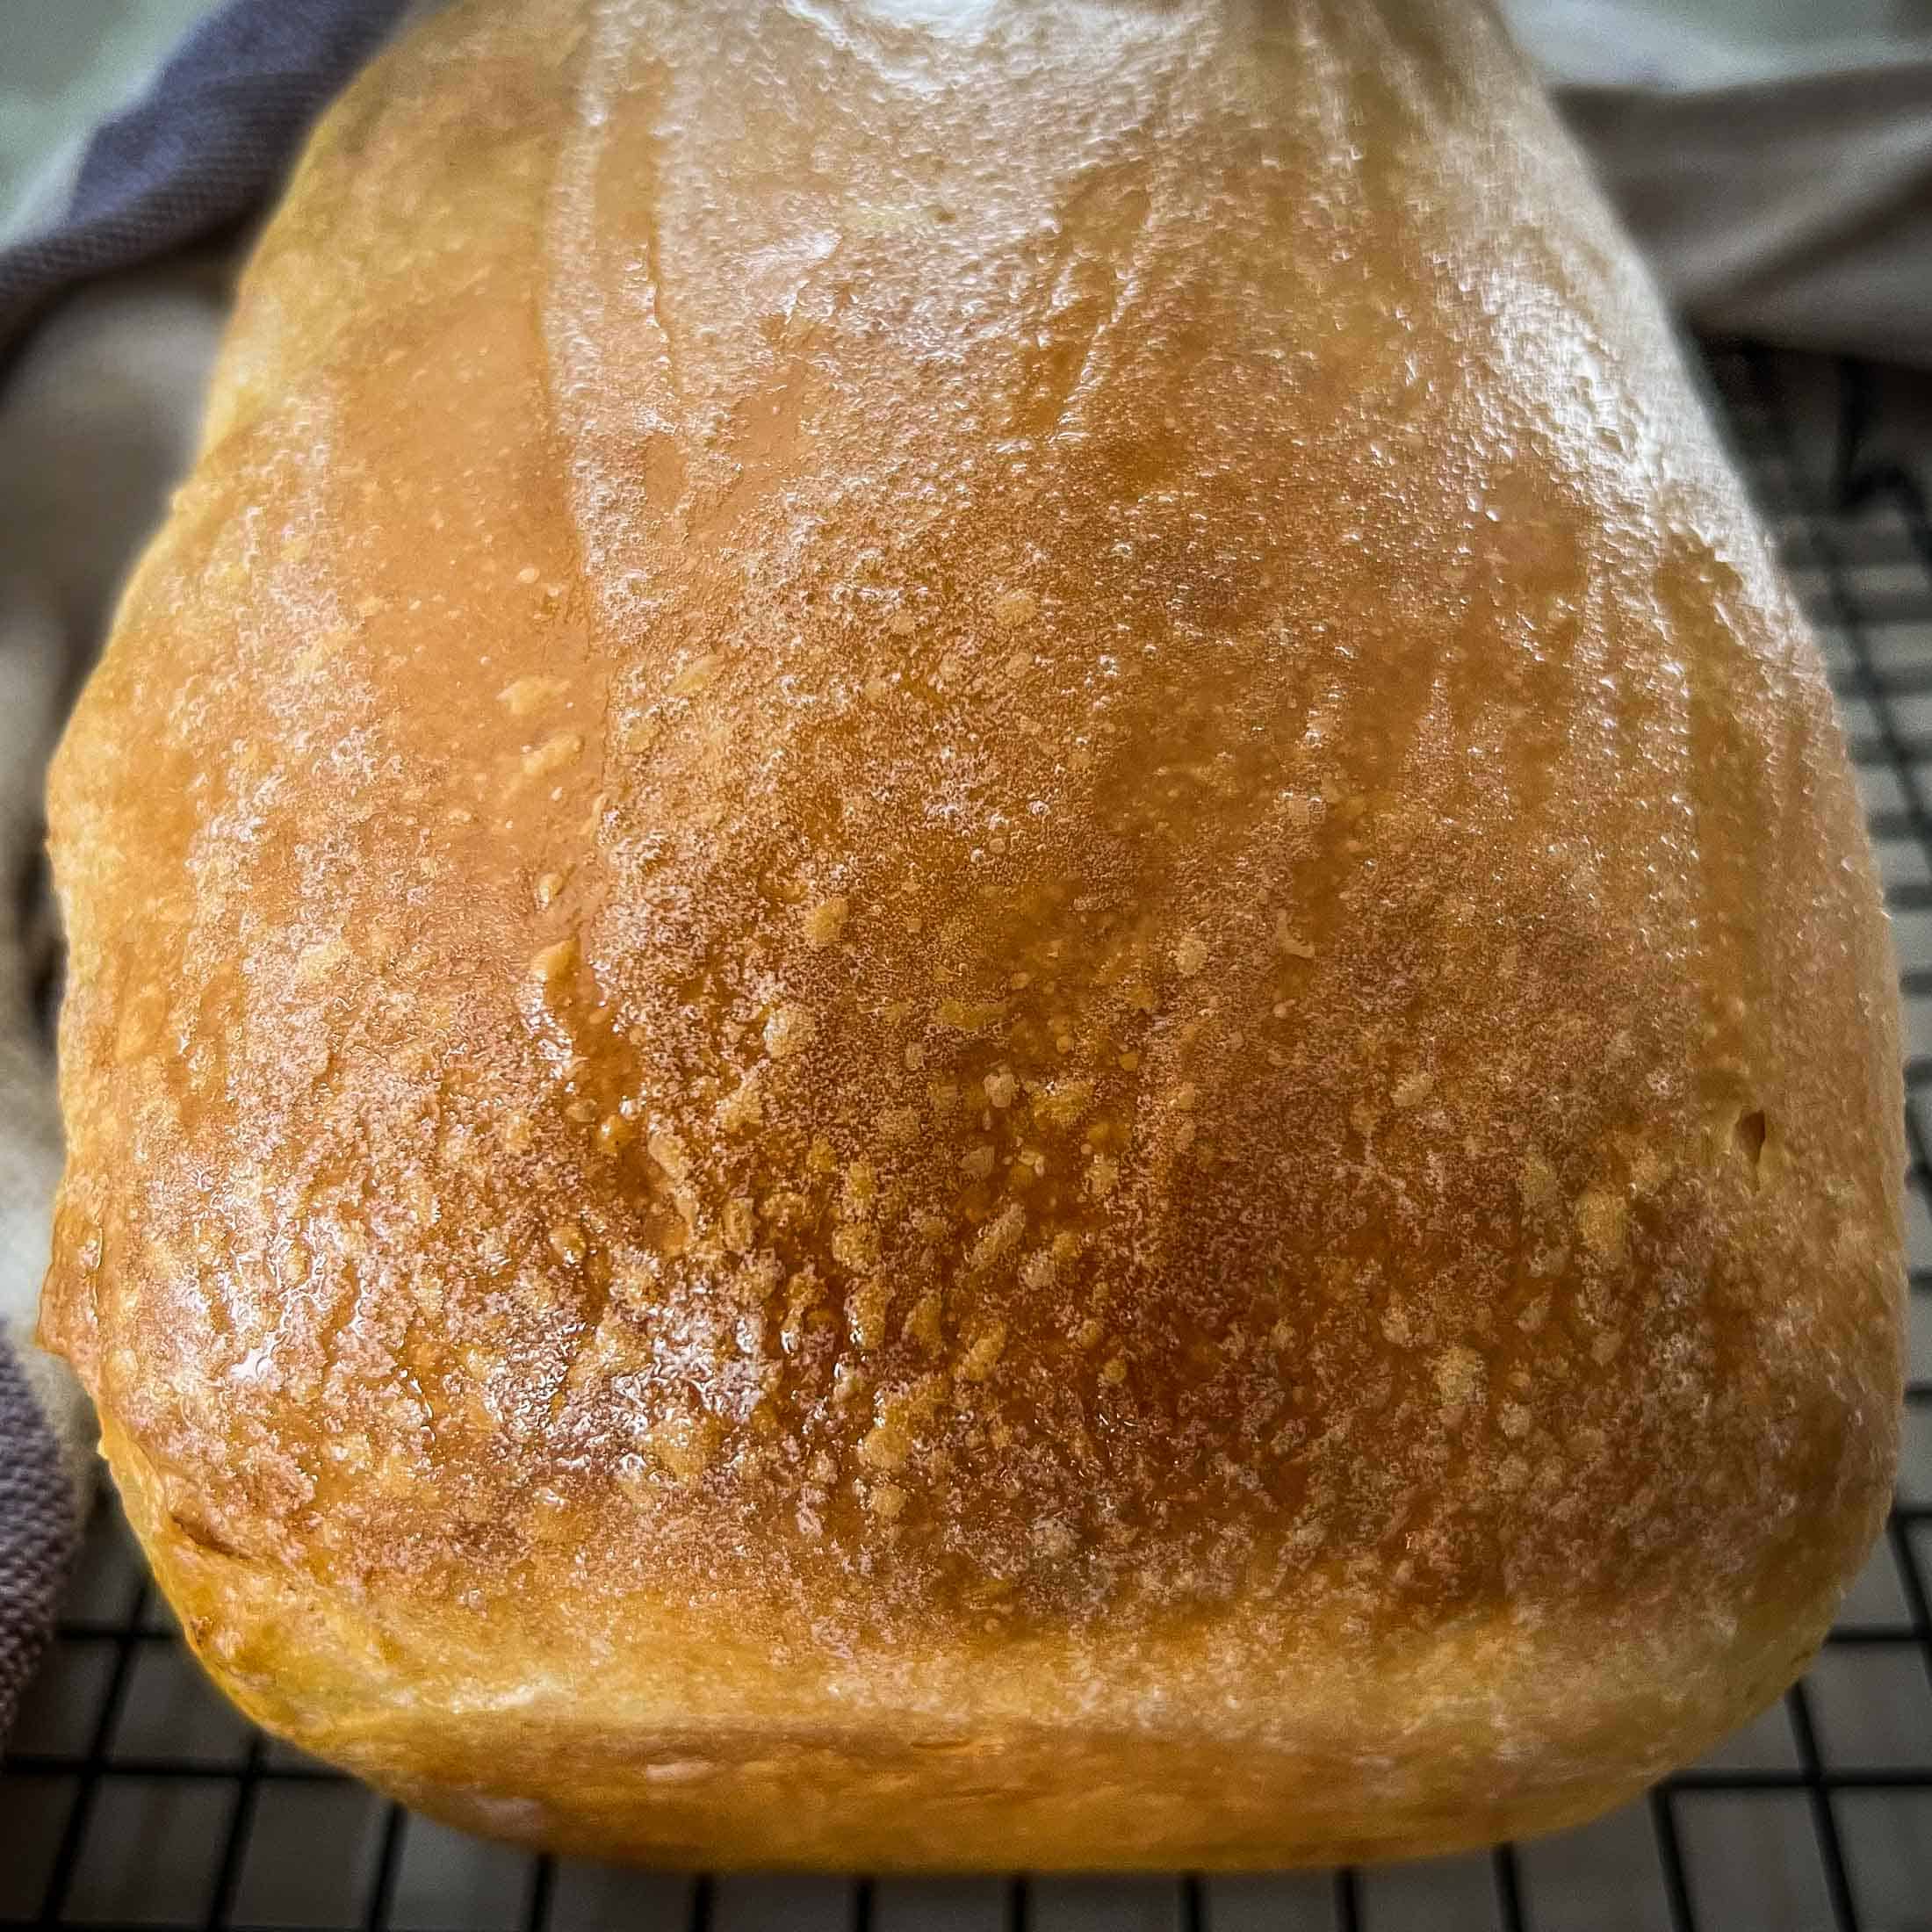 Sourdough sandwich loaf close up showing a browned crust shiny from butter.